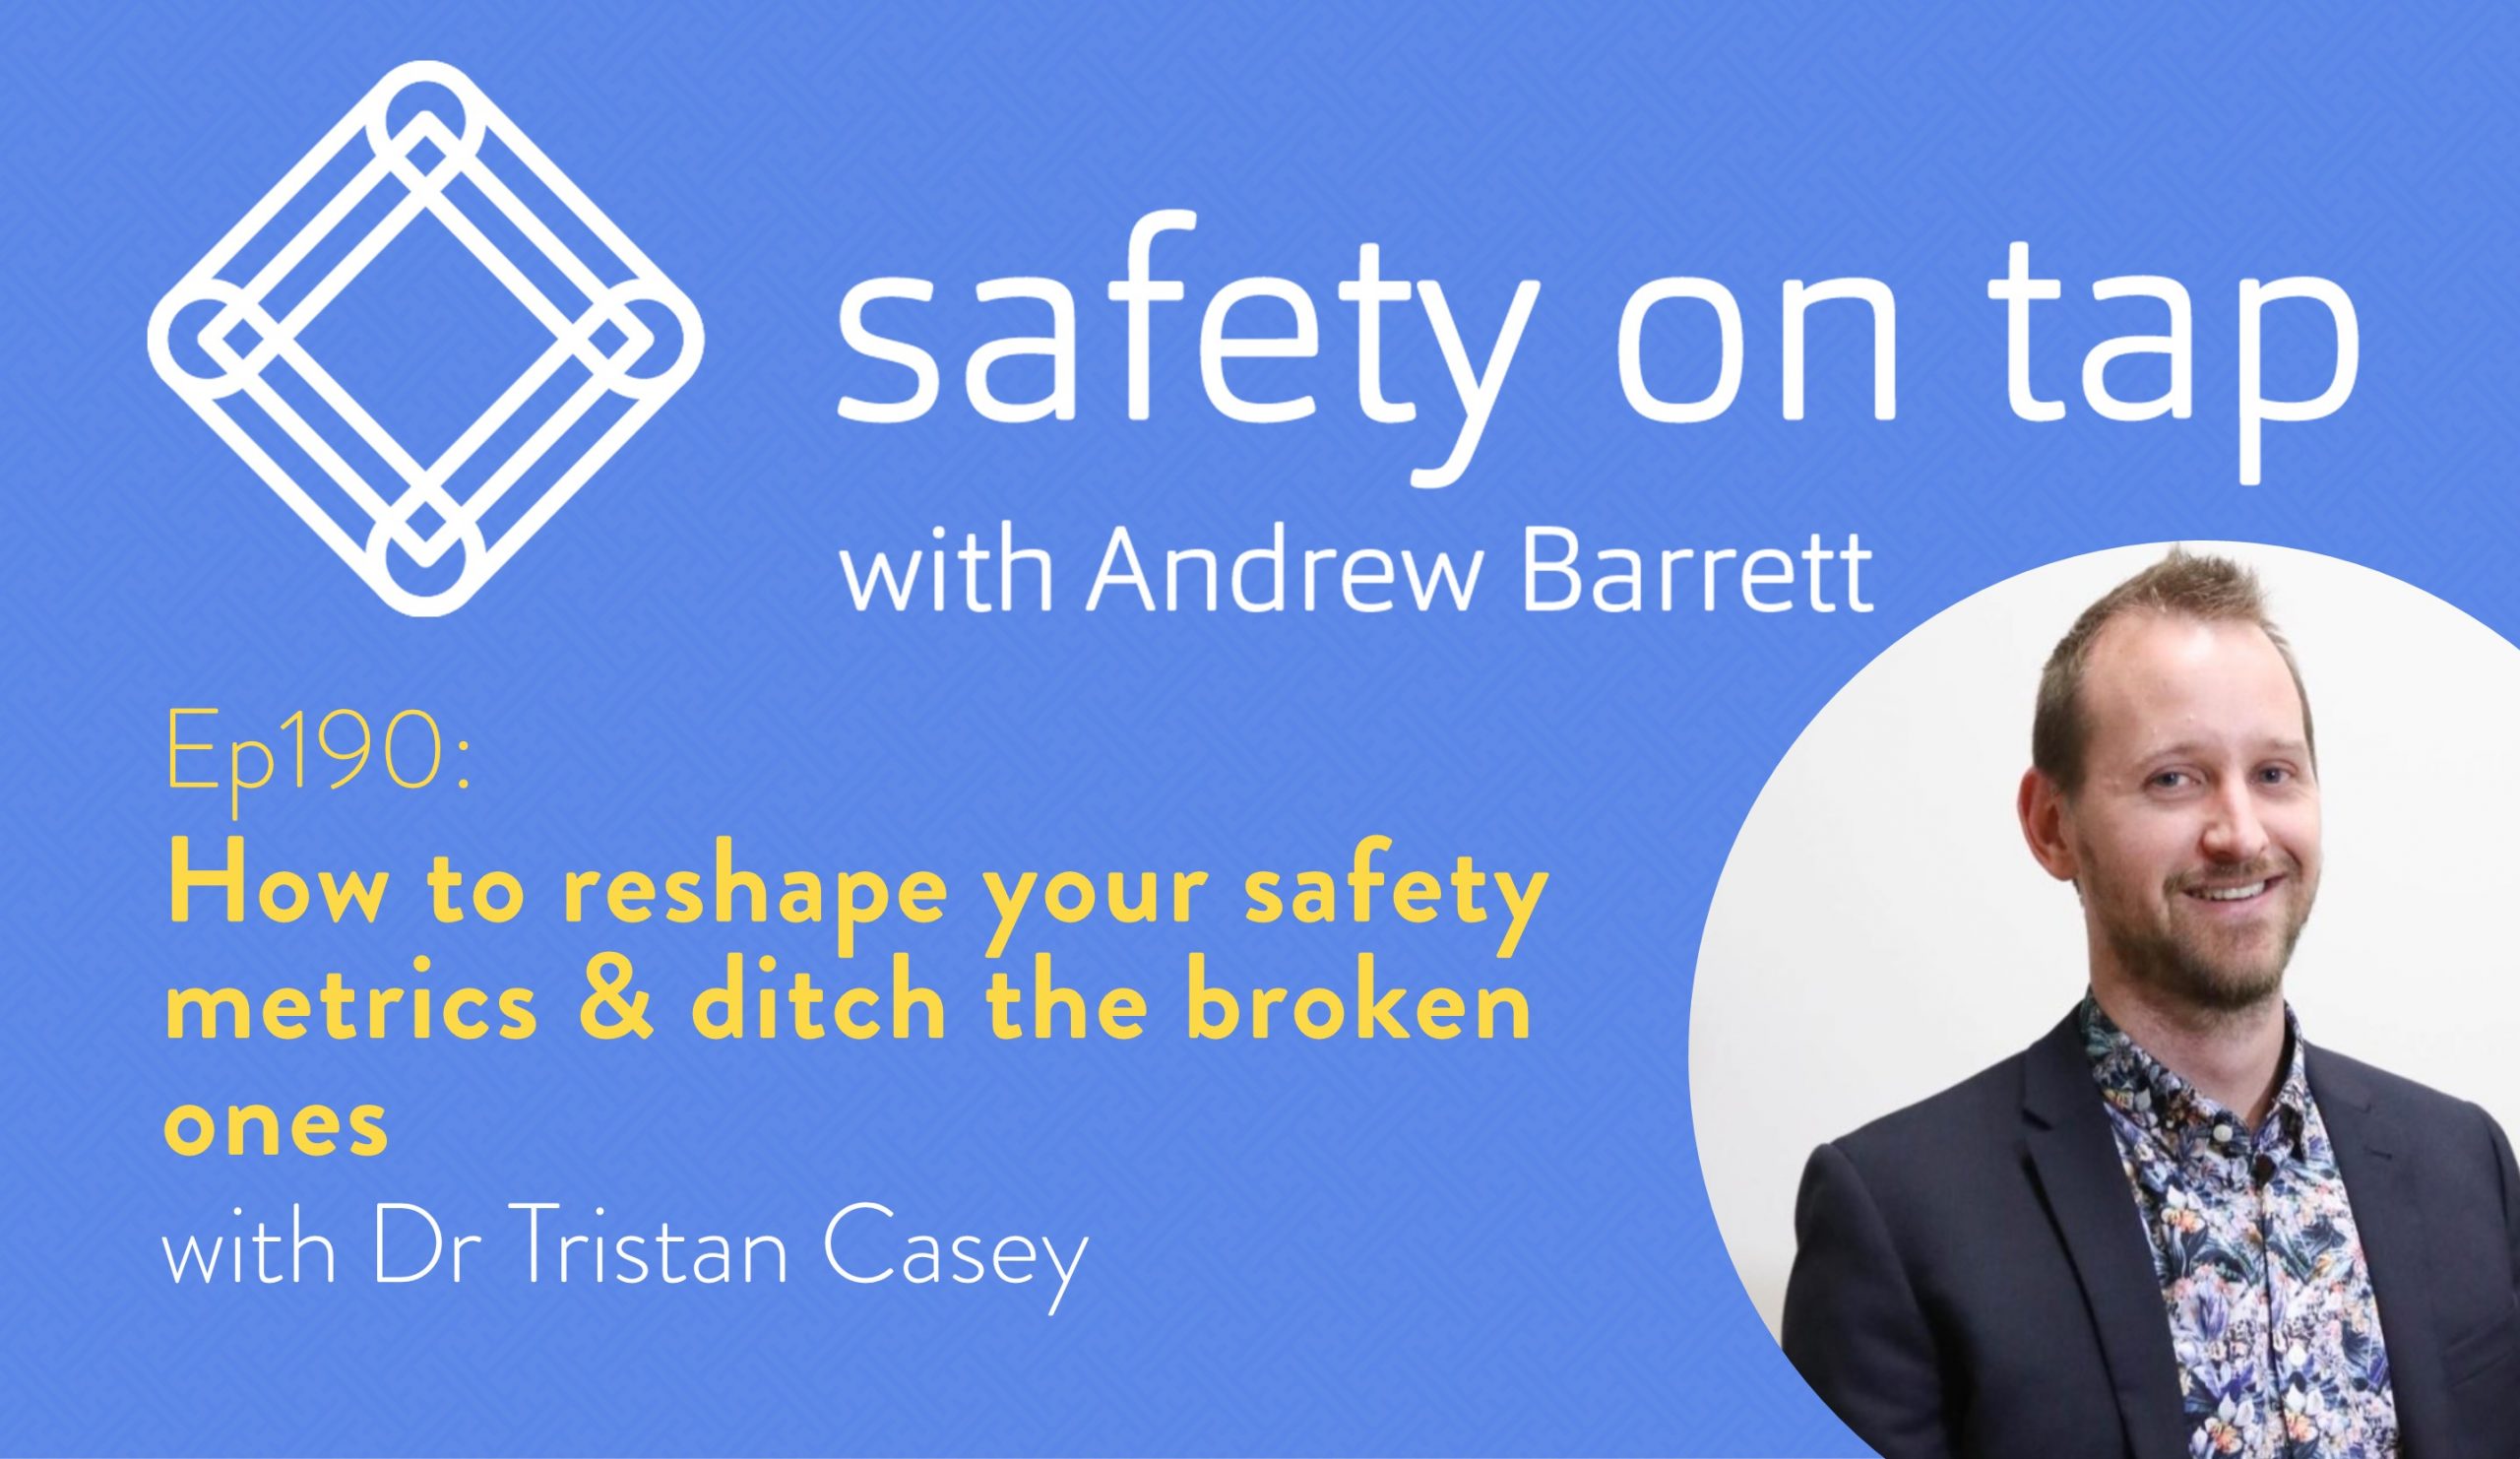 Ep190: How to reshape your safety metrics & ditch the broken ones, with Dr Tristan Casey